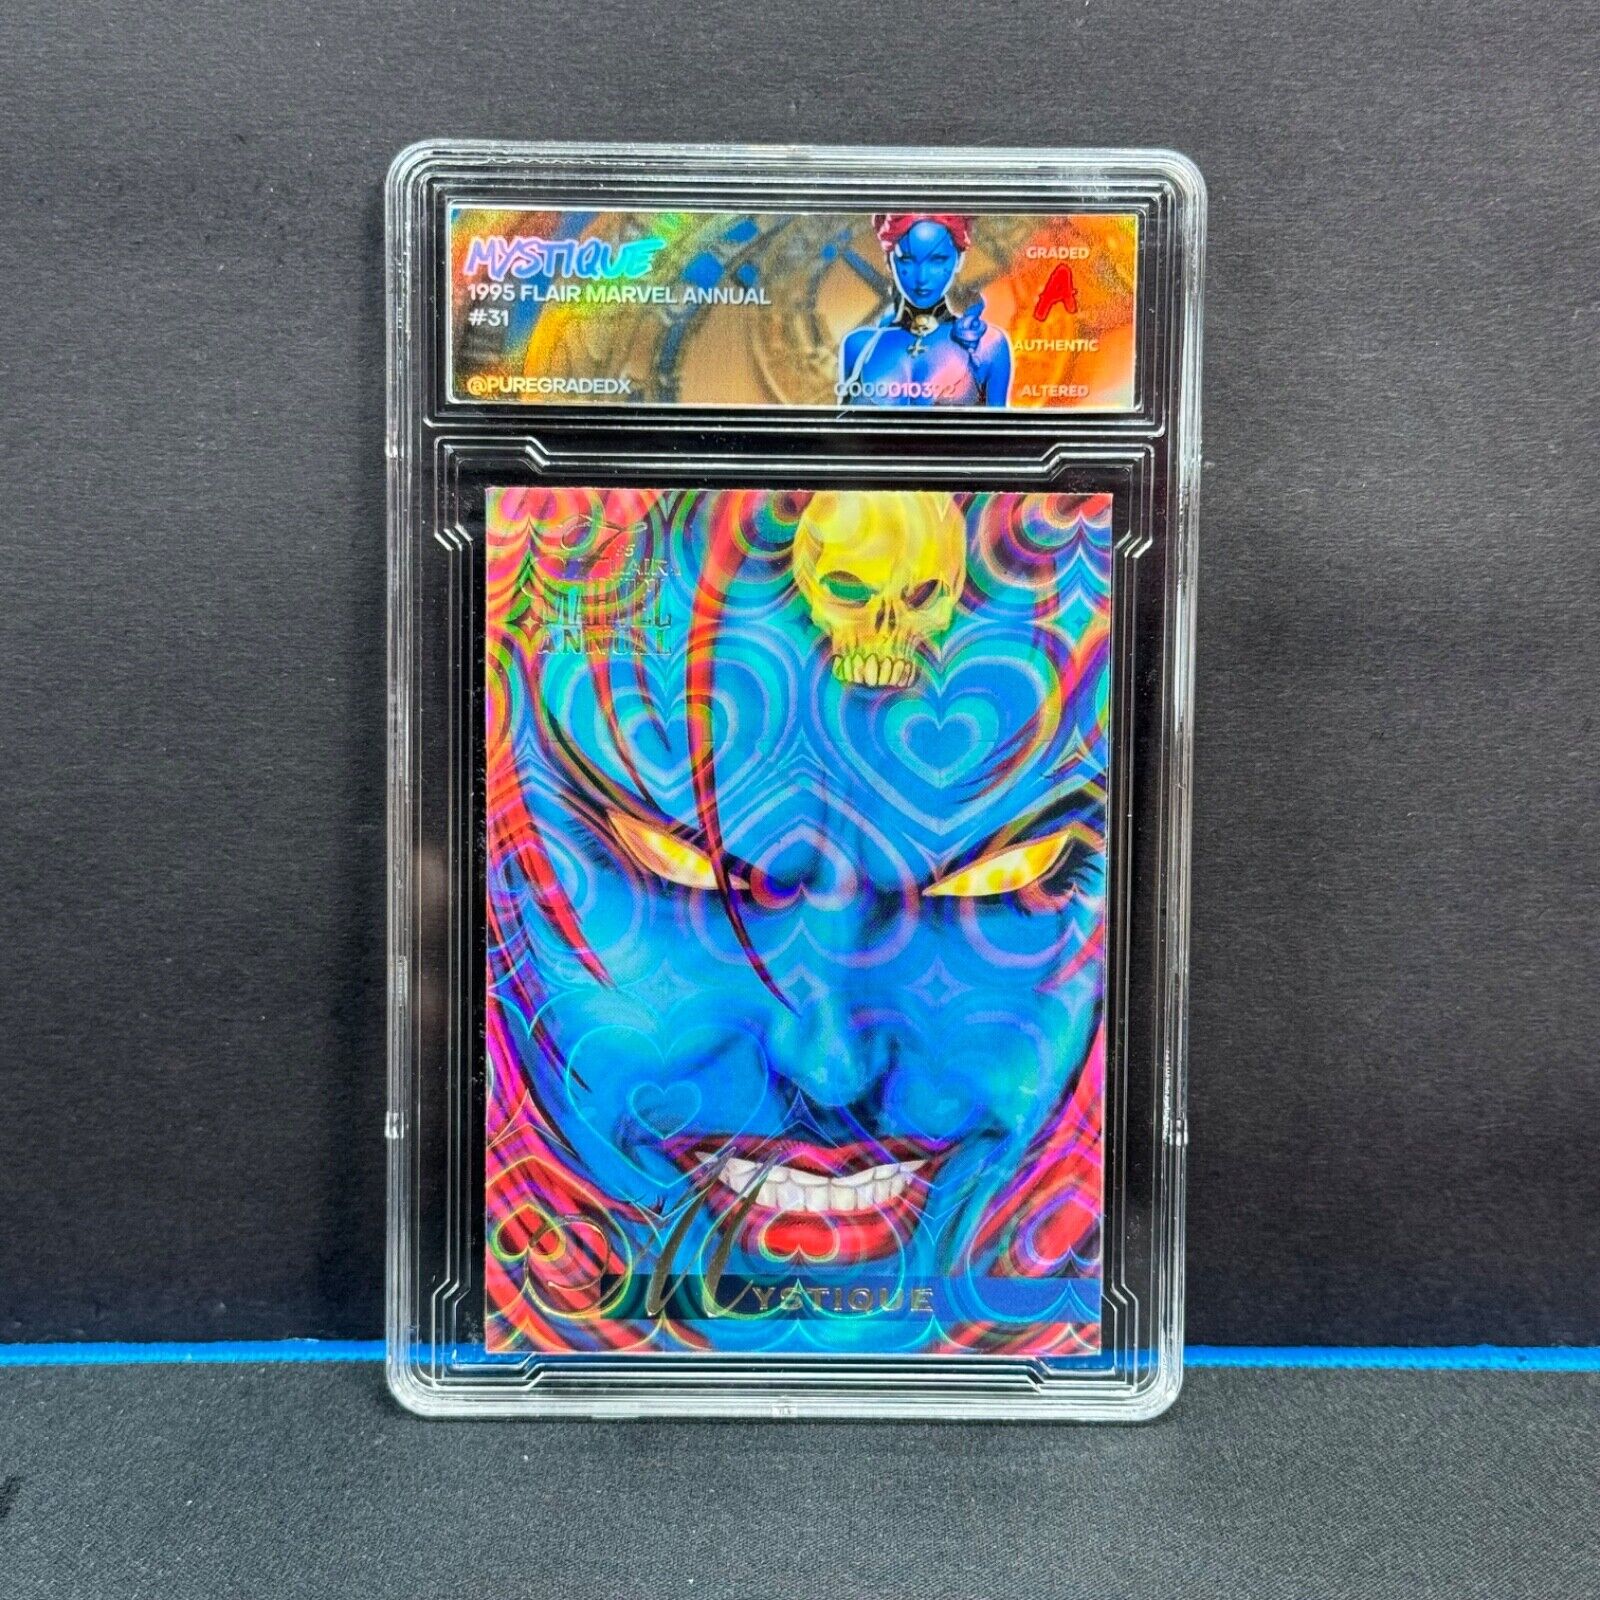 1995 Flair Marvel Annual Mystique #31 Altered Refractor